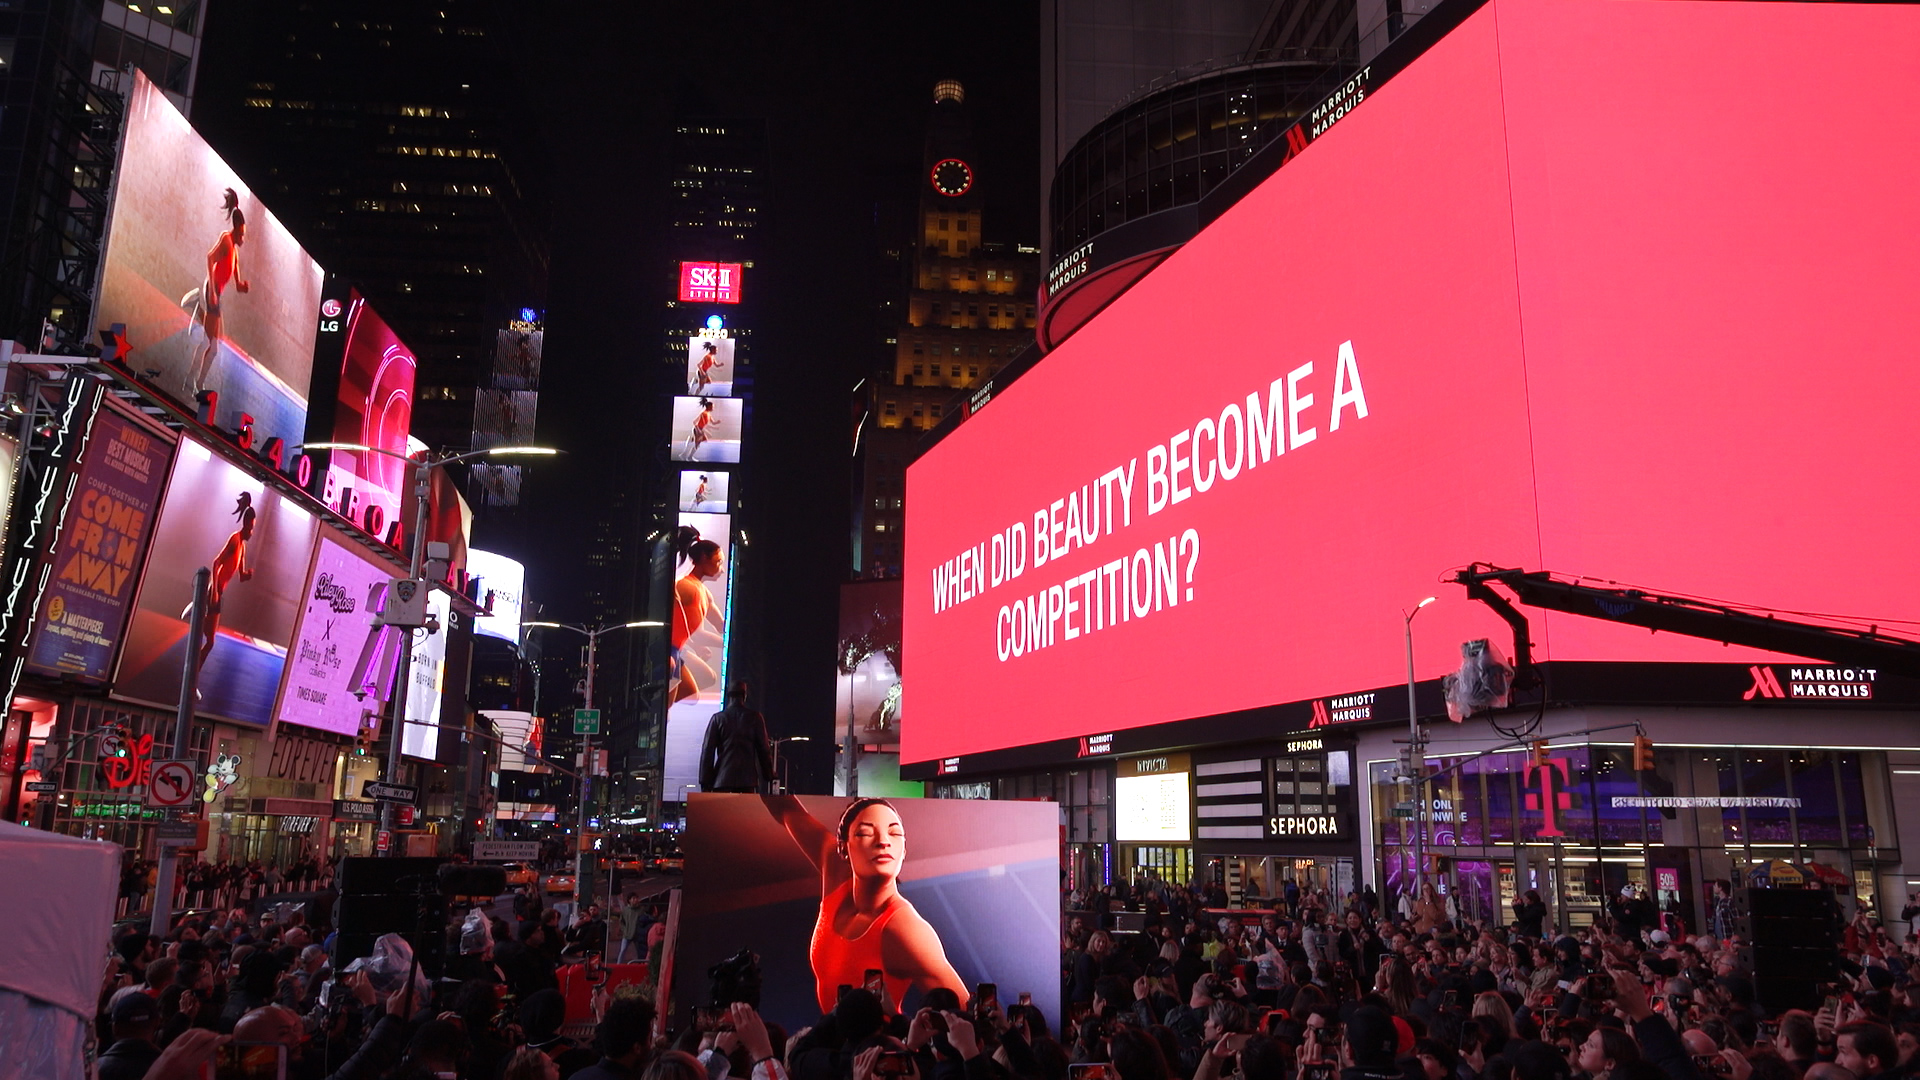 Simone Biles took over Times Square New York in an epic battle against “Kaijus” at the launch of “VS” an SK-II STUDIO animated series.